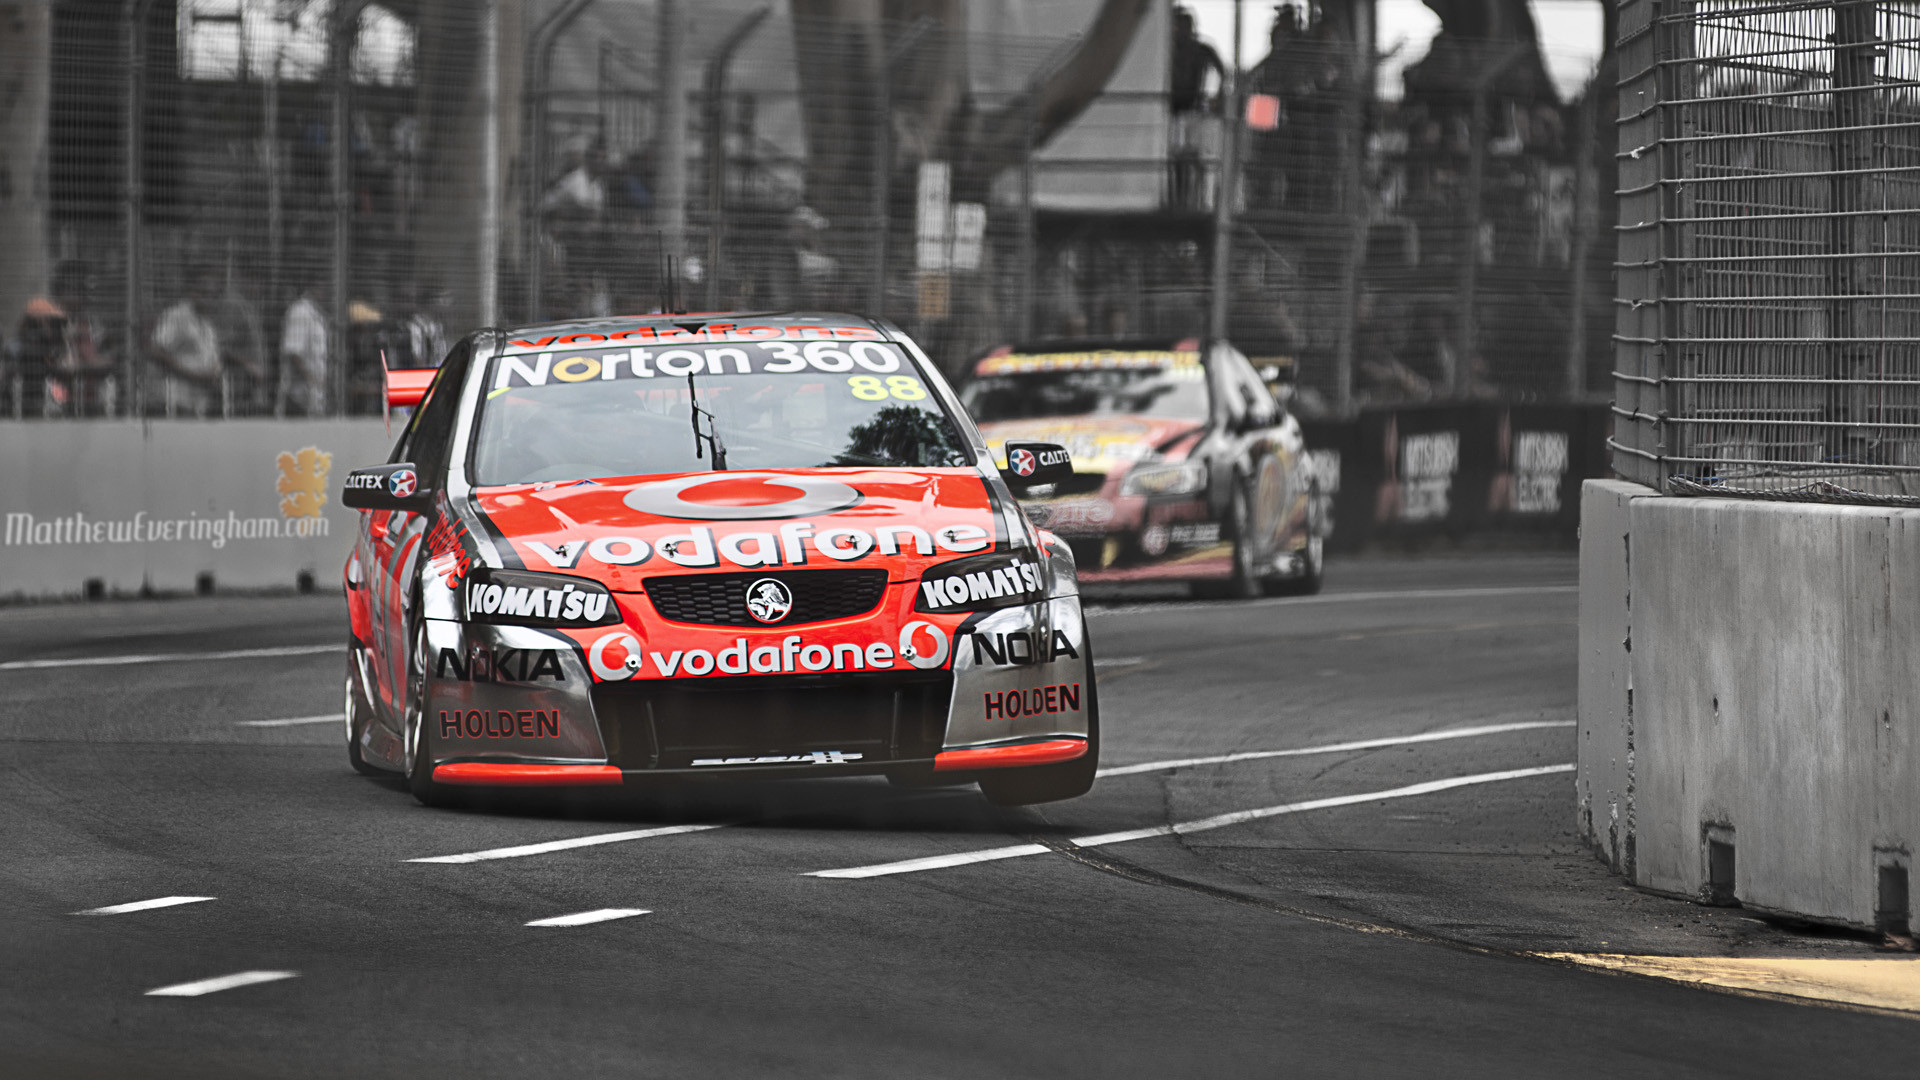 1920x1080 V8 Supercars Wallpapers